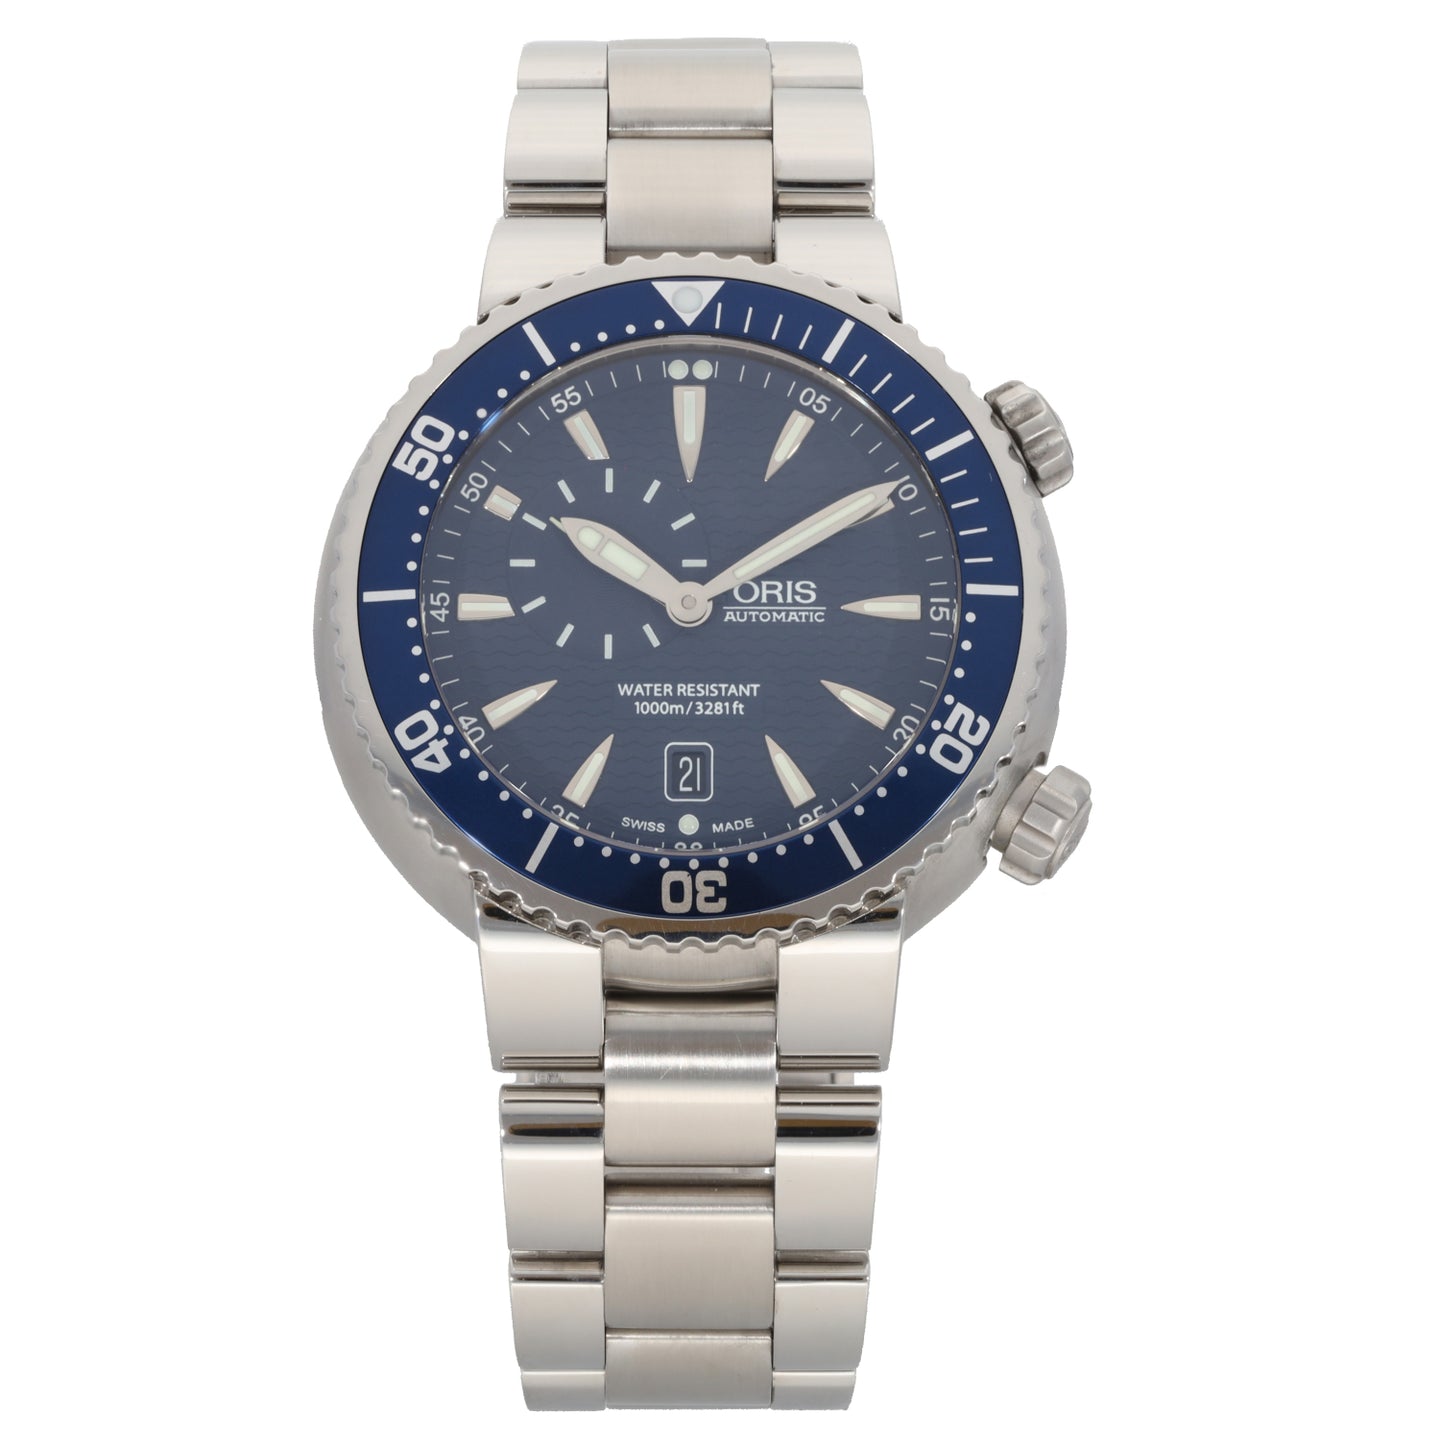 Oris ProDiver 7609 47mm Stainless Steel Watch